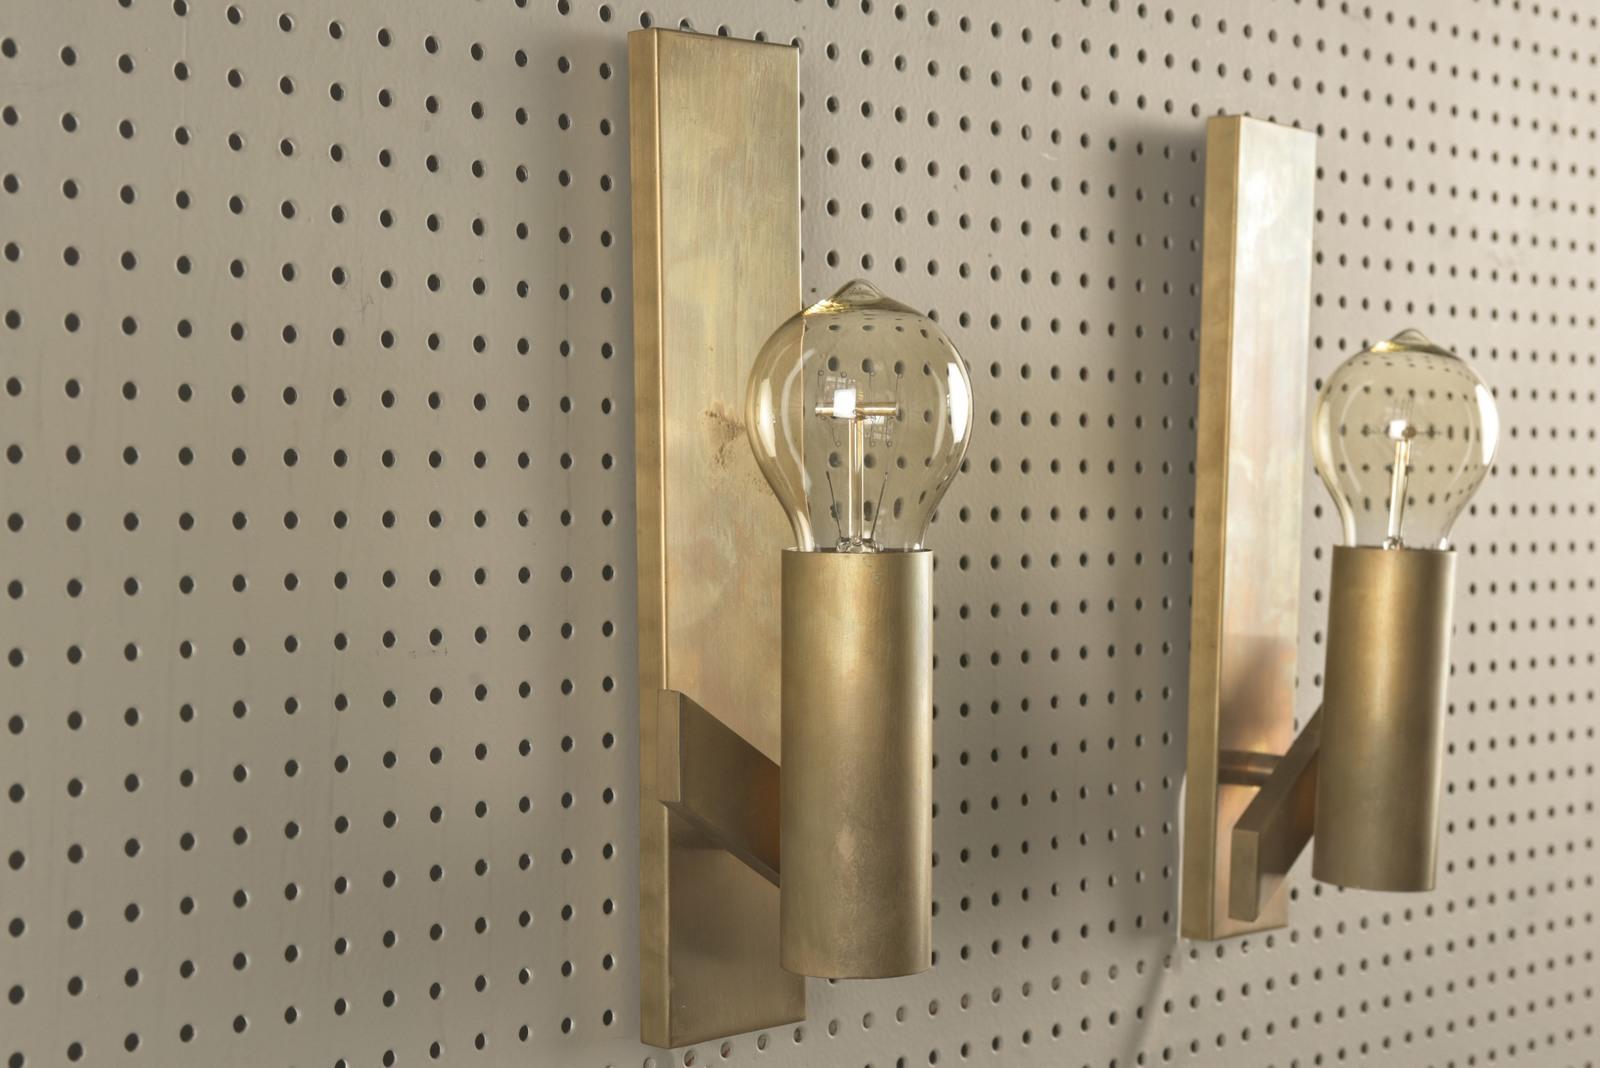 Mid-20th Century Pair of Brass Wall Lights, Germany - 1960 For Sale